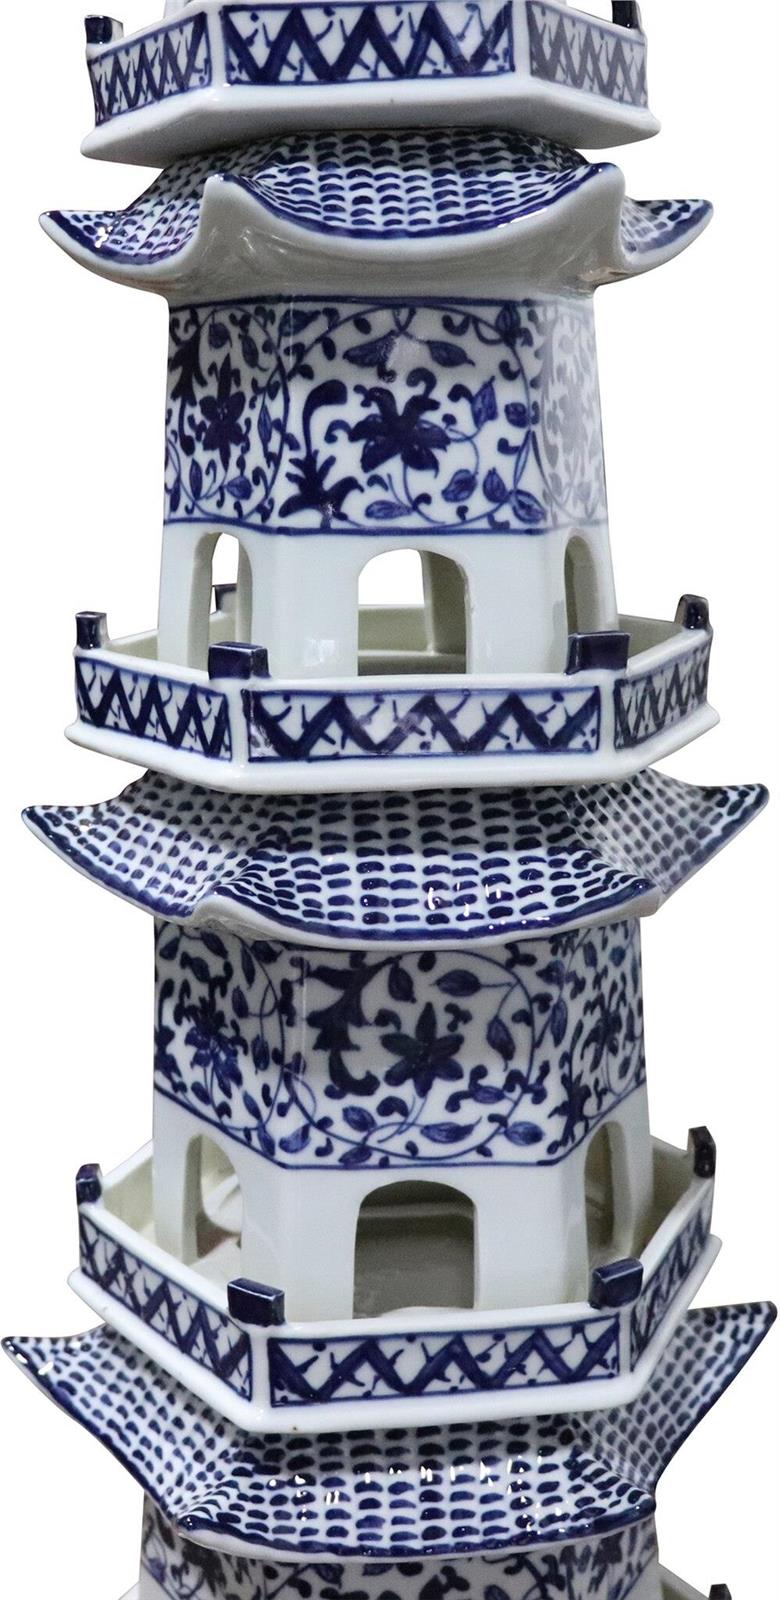 Pagoda Sculpture Twisted Vine Abstract 7-Tier Blue White Ceramic Handmade-Image 3